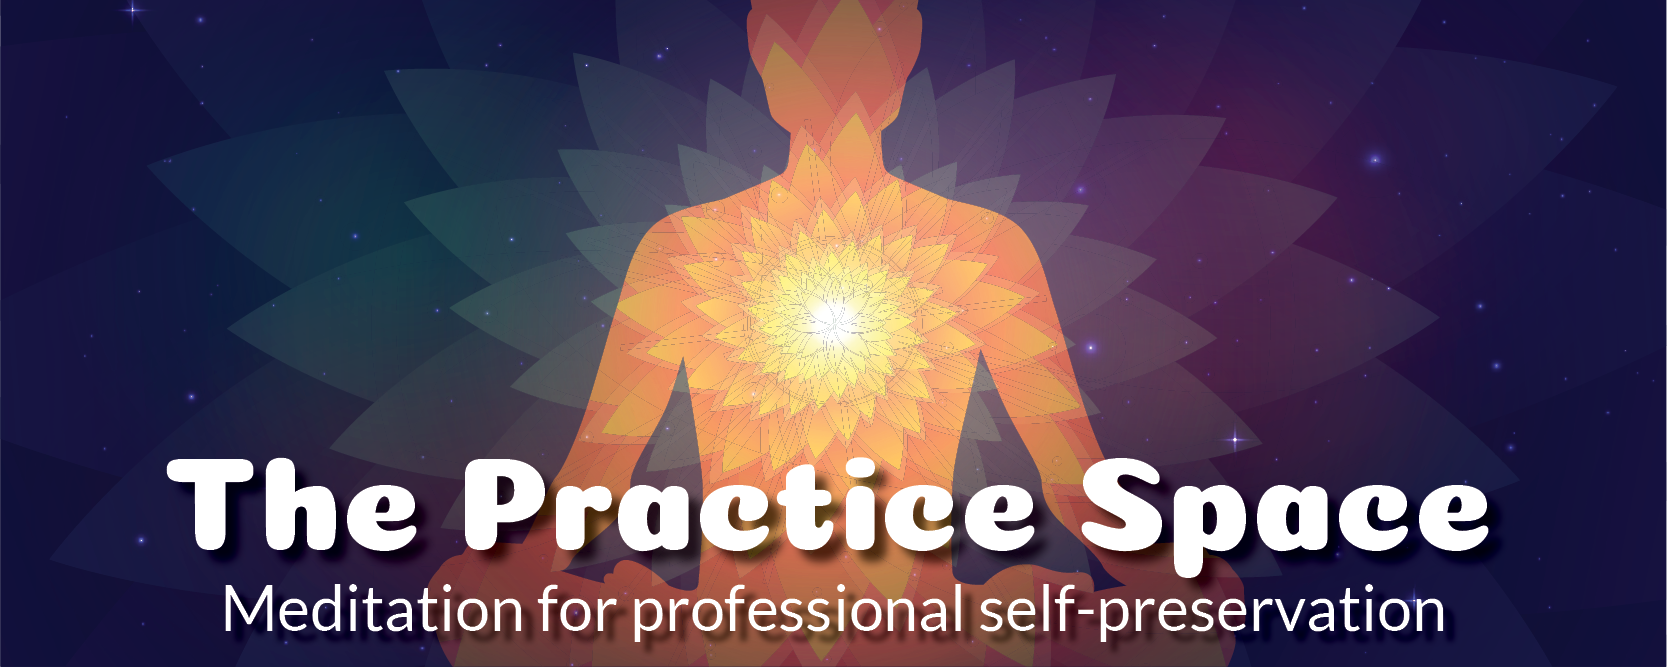 The Practice Space - meditation for professional self-preservation